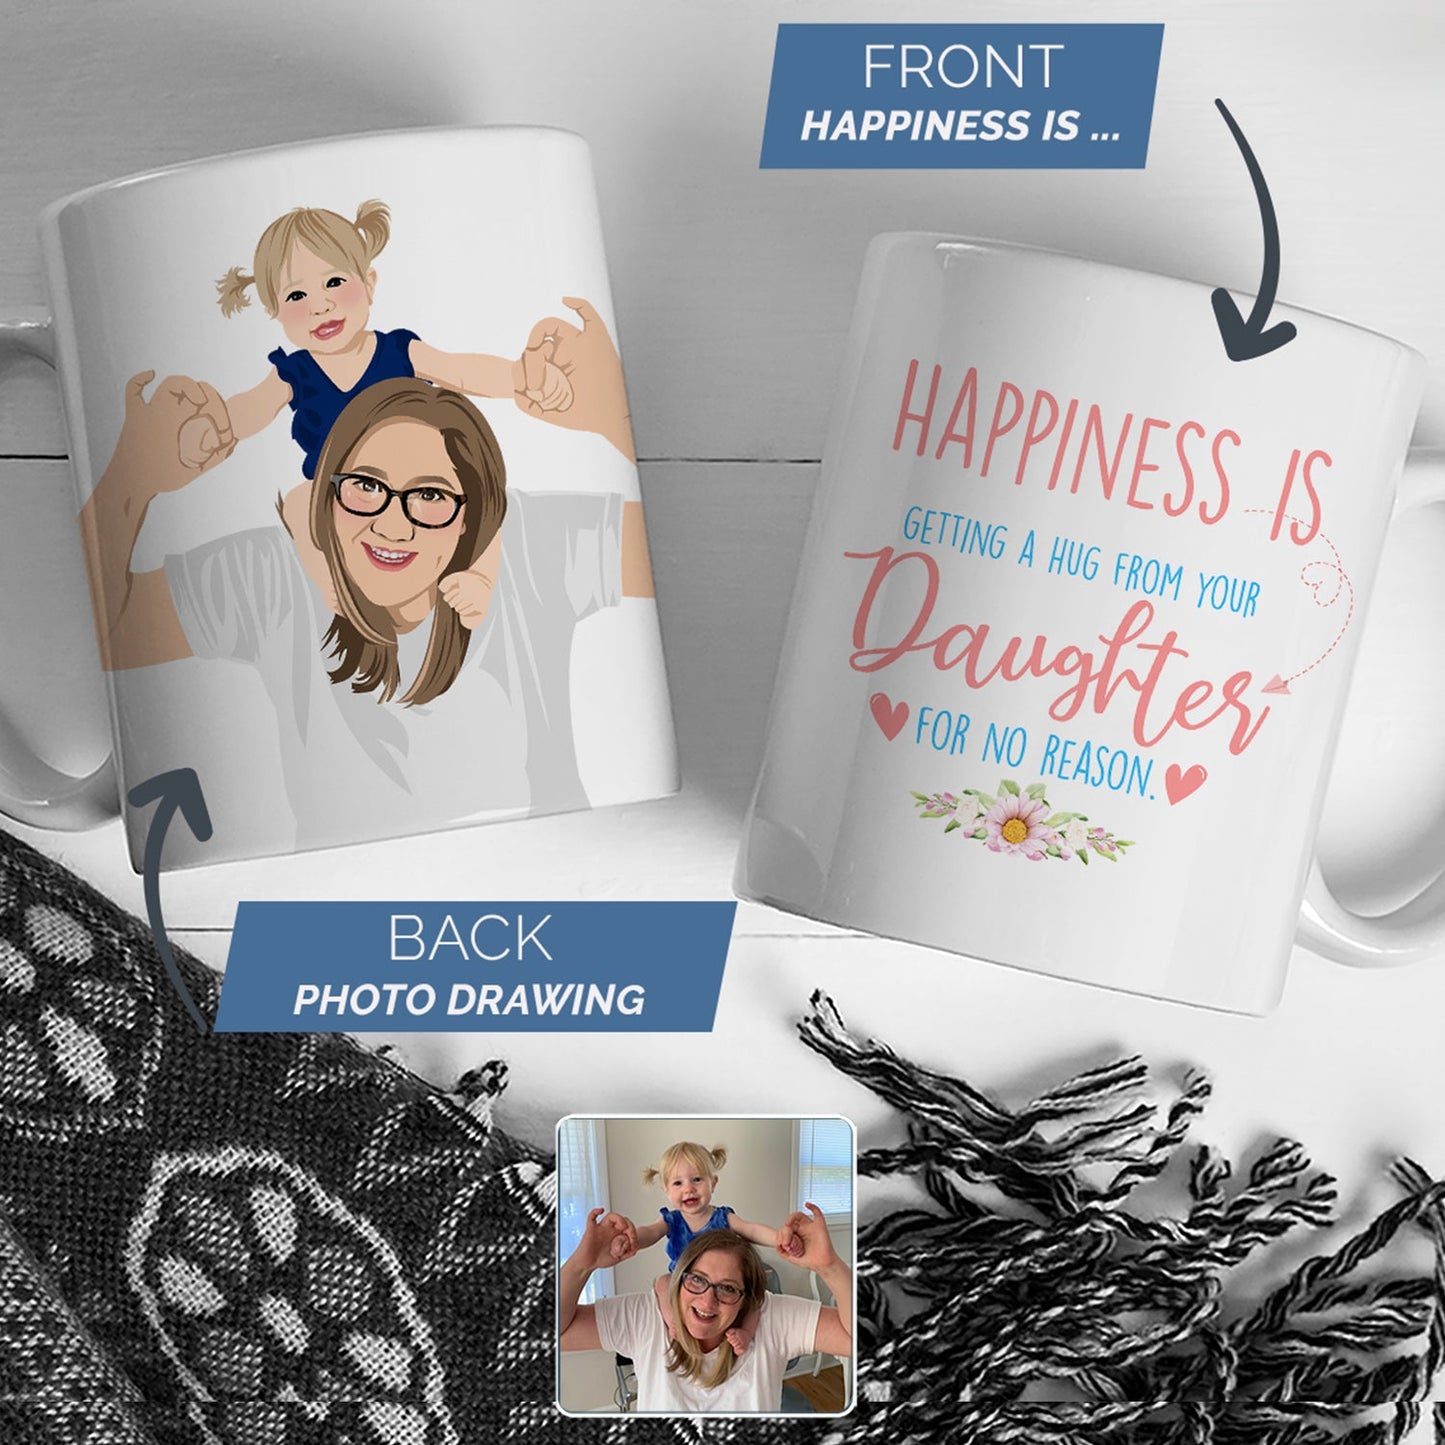 Personalized Mom and Daughter Mug